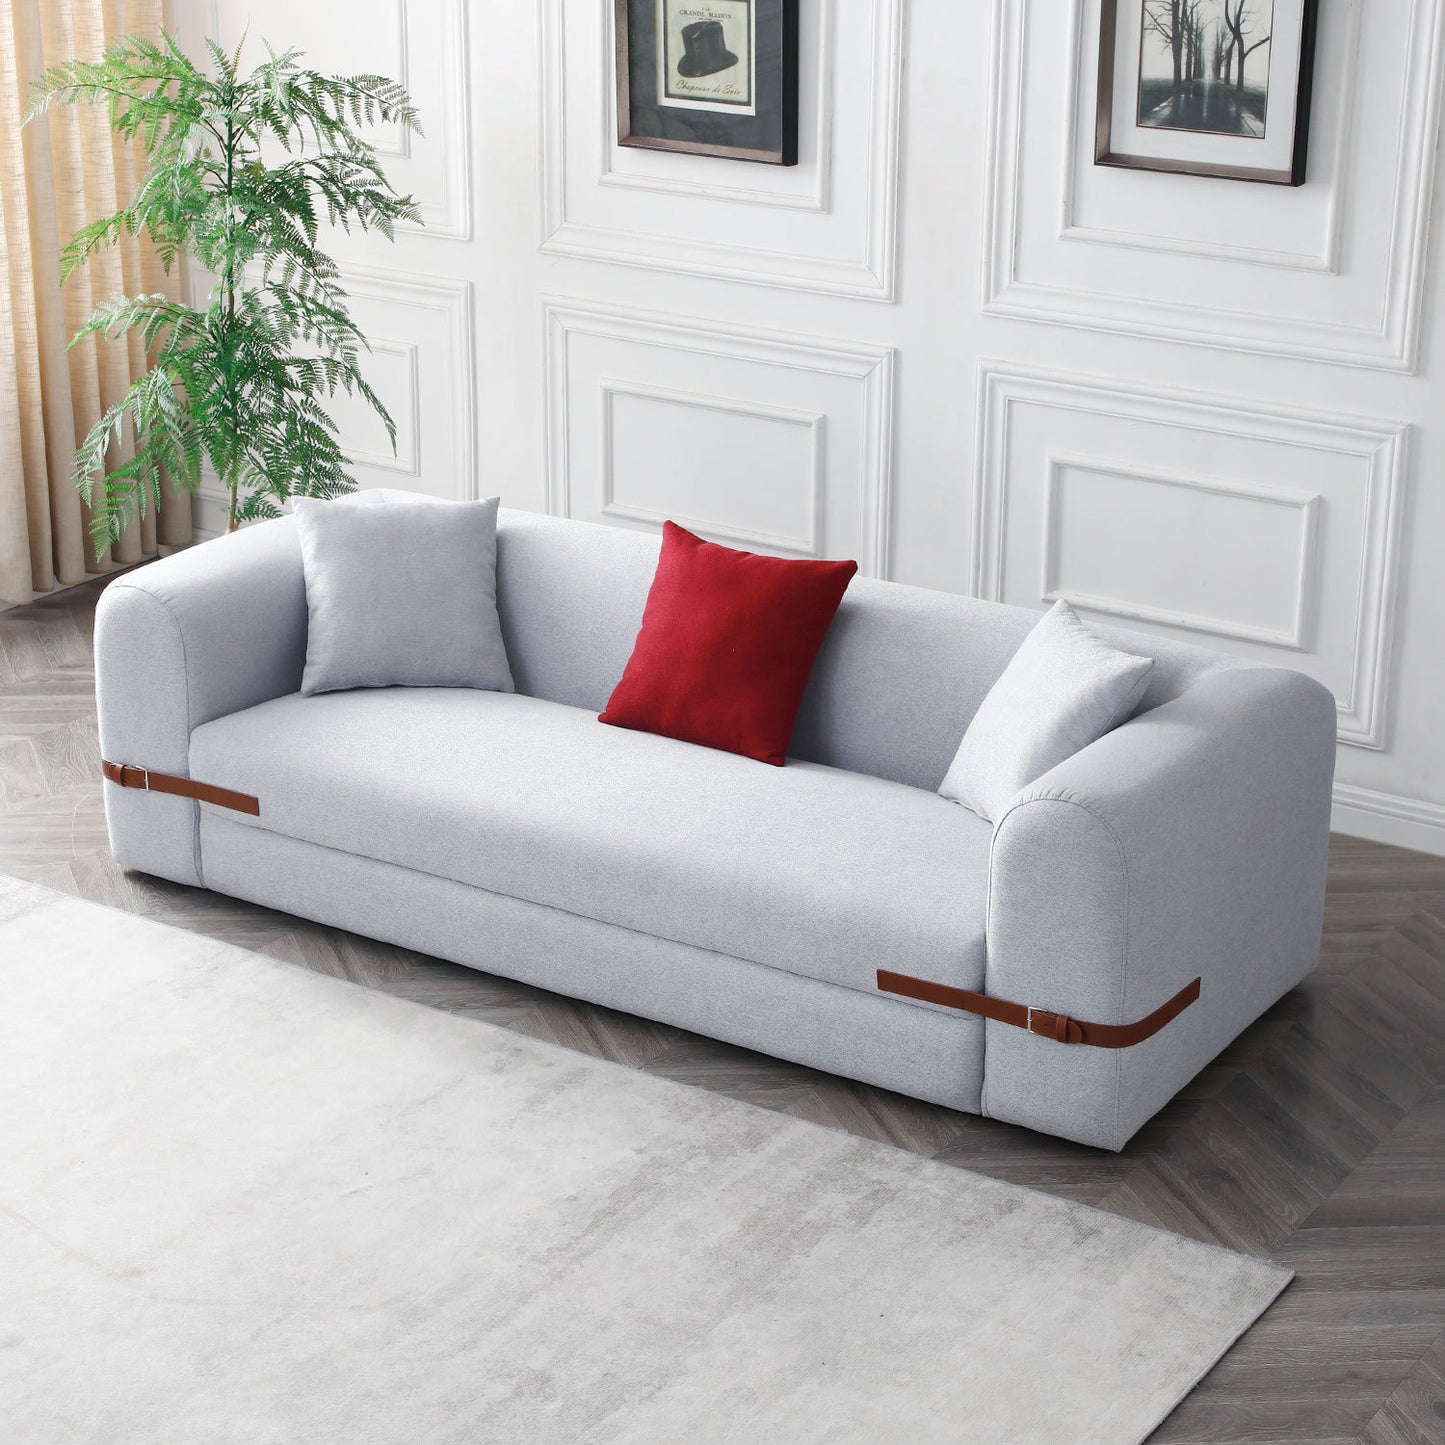 Modern Sofa Couch Contrast color Saddle leather belt Design  3 Seat Sofa for Living Room Bedroom, Apartment, Grey - Enova Luxe Home Store